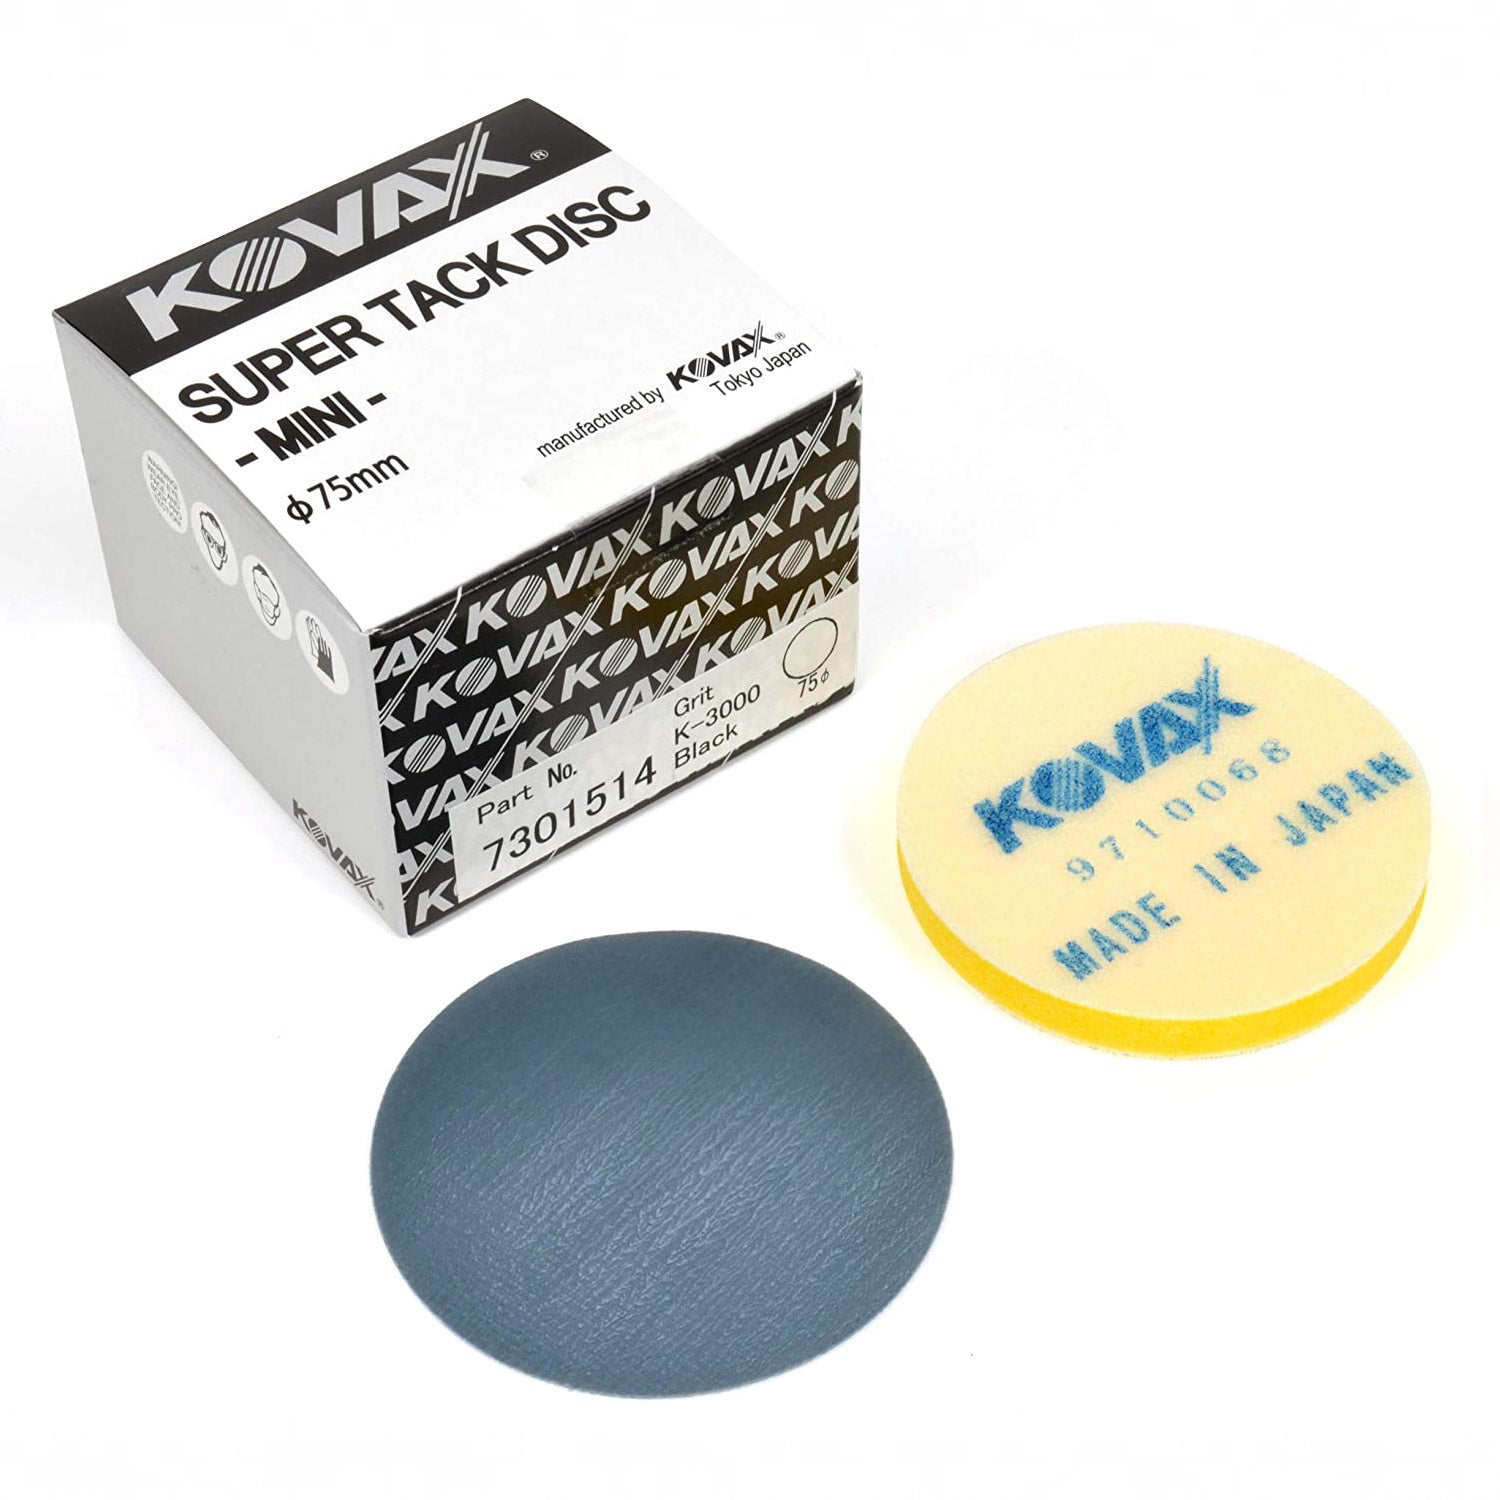 kovax-sandpaper-3-inch-3000-grit-black-sanding-discs-with-interface-pad